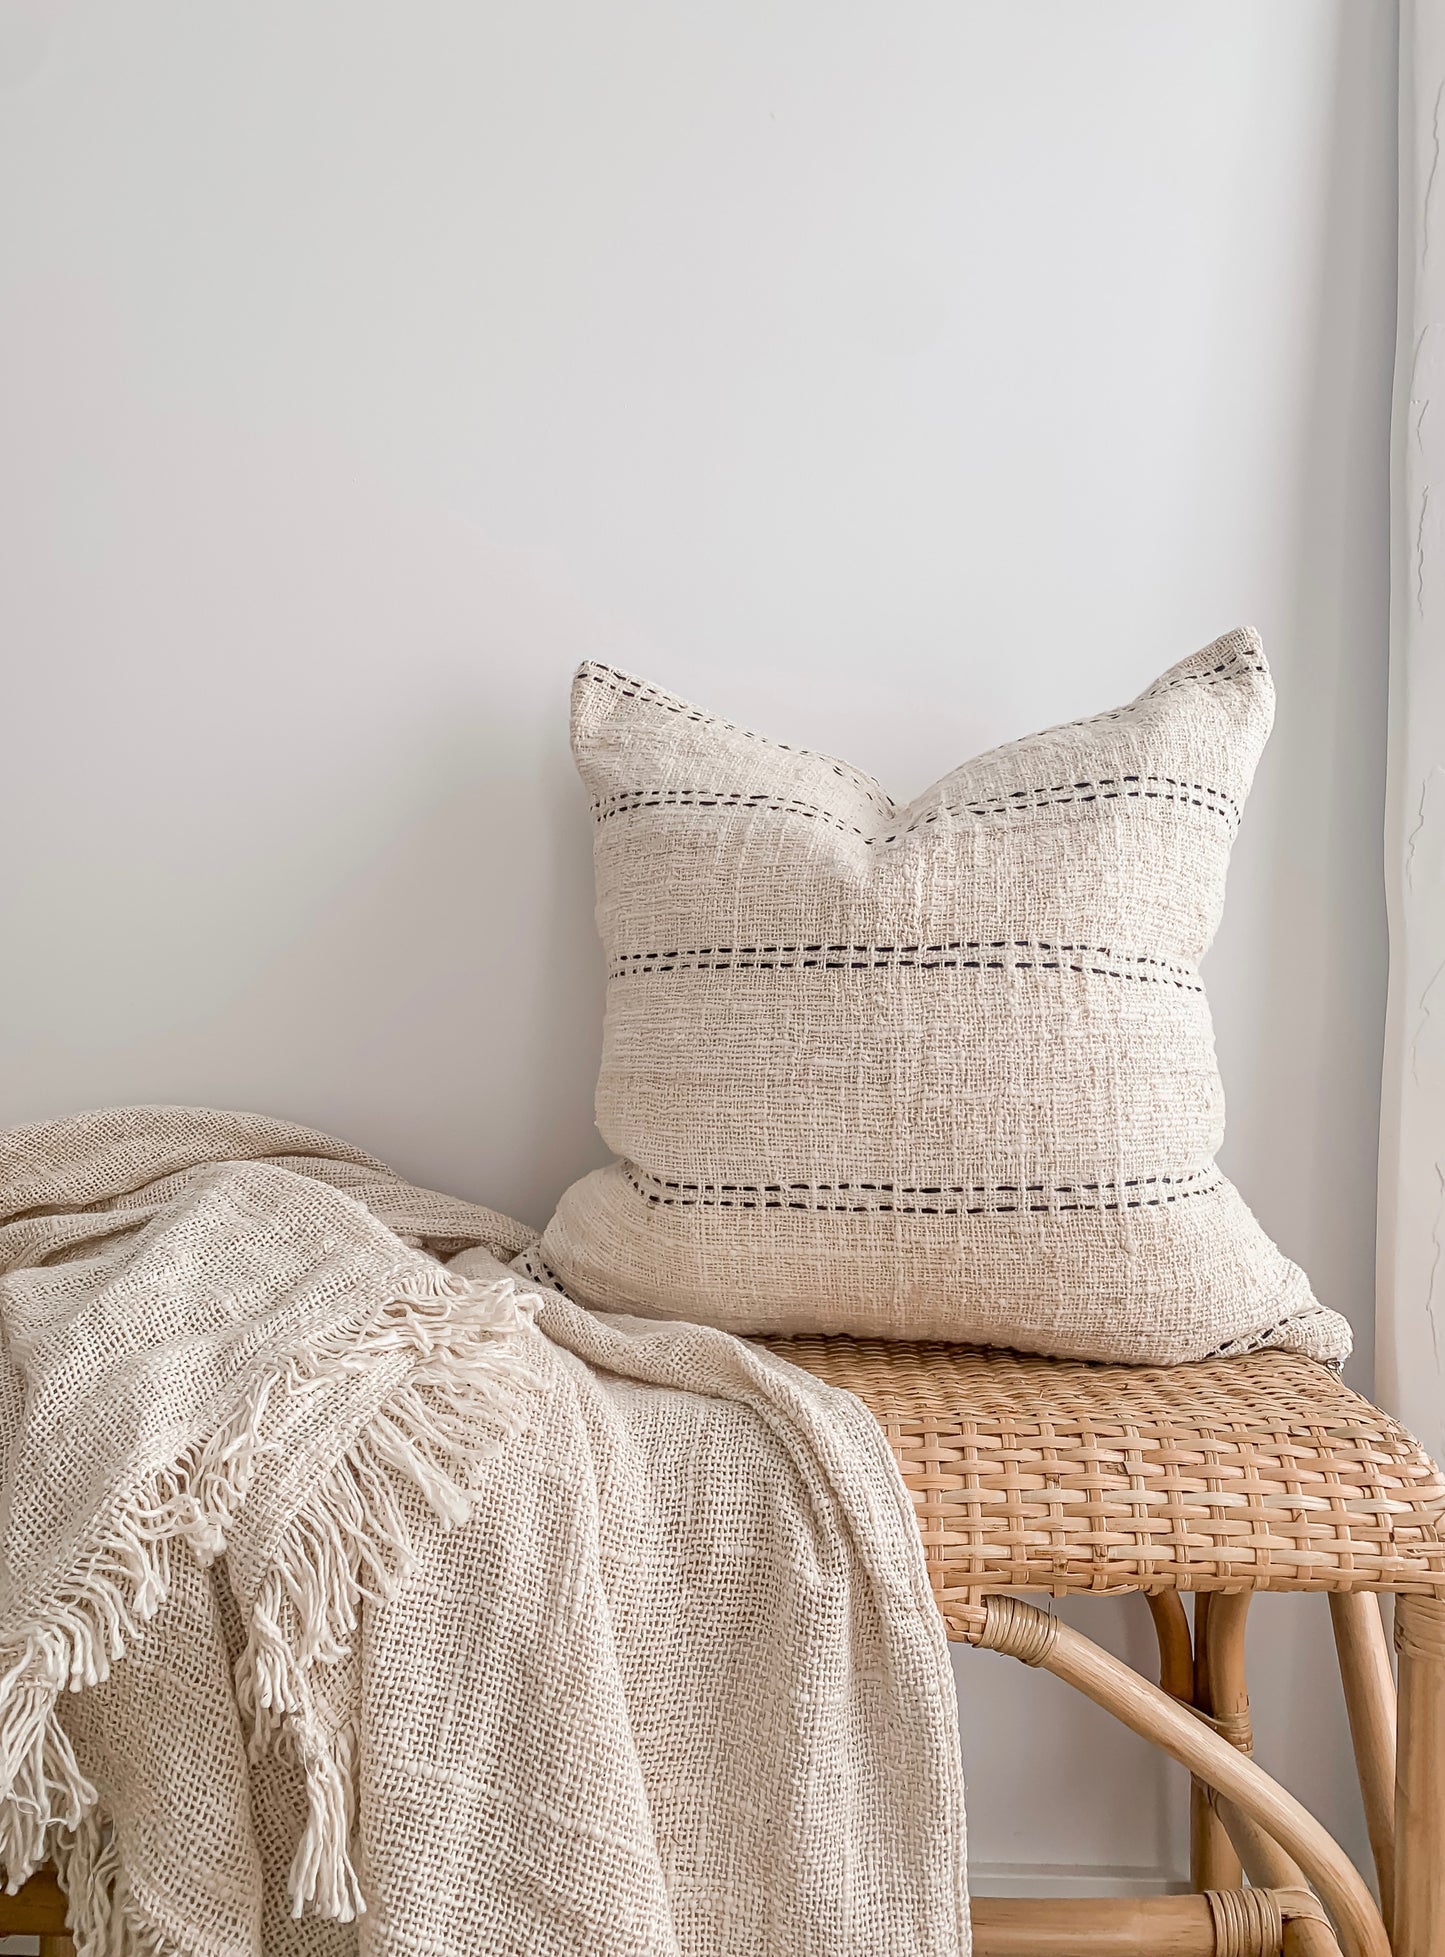 A Nyah | Stitch Cushion wicker bench with a simple patterned blanket. Brand: Barre Living.